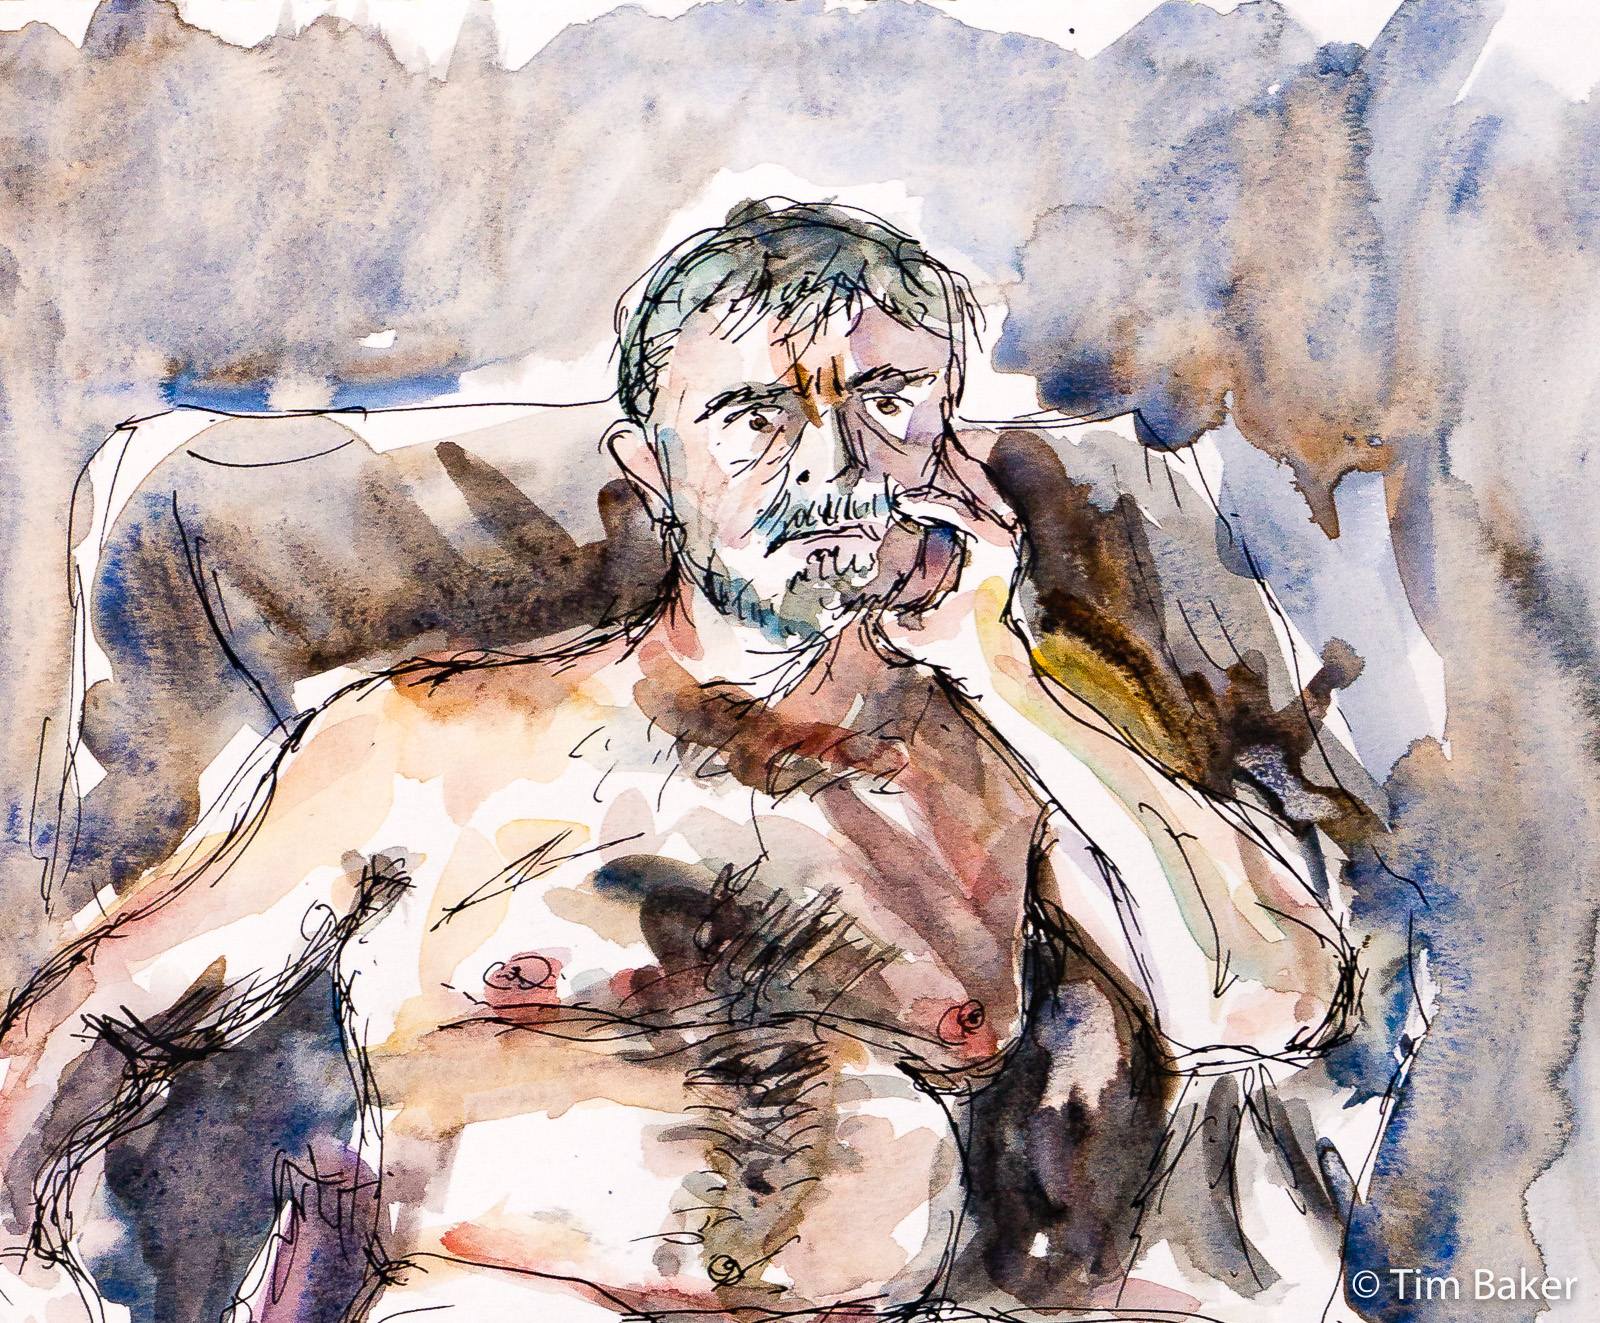 Maurice (detail), Canela Life Drawing, Fountain Pen and watercolour, A3 Canson XL sketchbook.